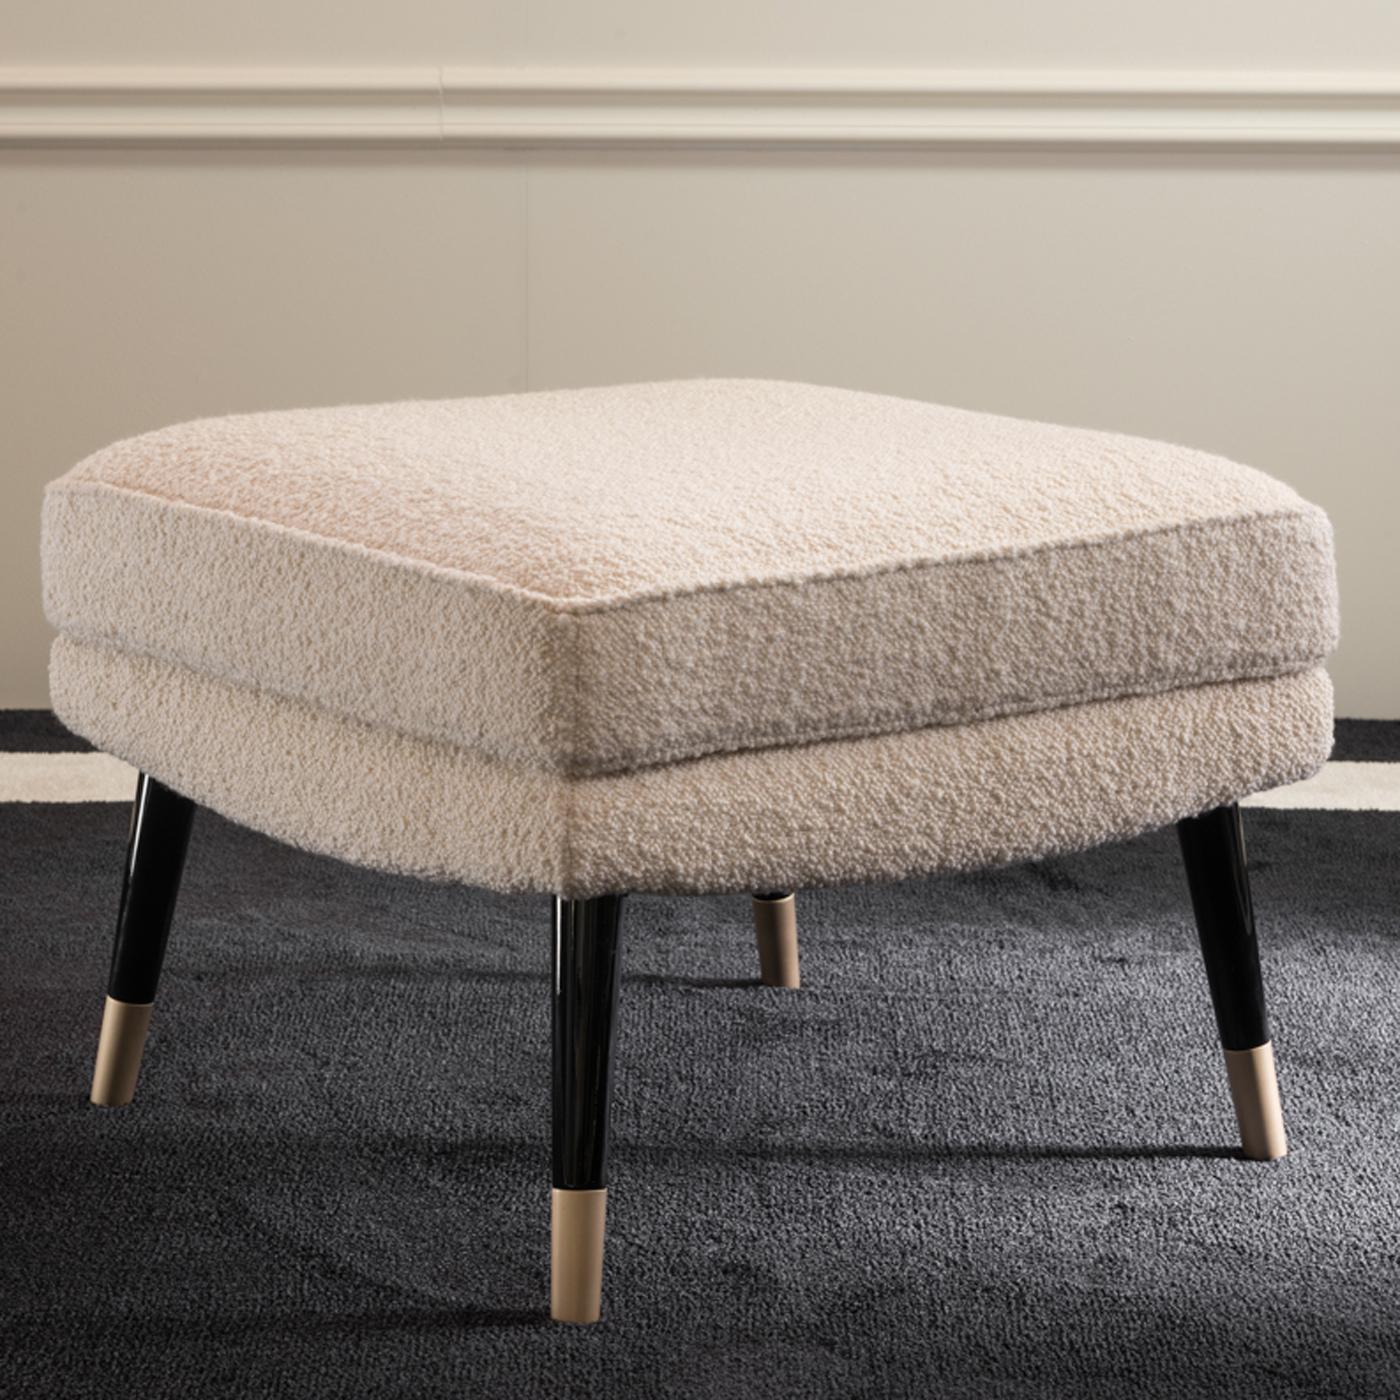 A comfortable seat with a Classic allure, this refined pouf can be arranged in multiples or paired with the Bernadette sofa to create a lounge look in a modern living room or bedroom. The midcentury inspiration is revealed in the conical wooden legs